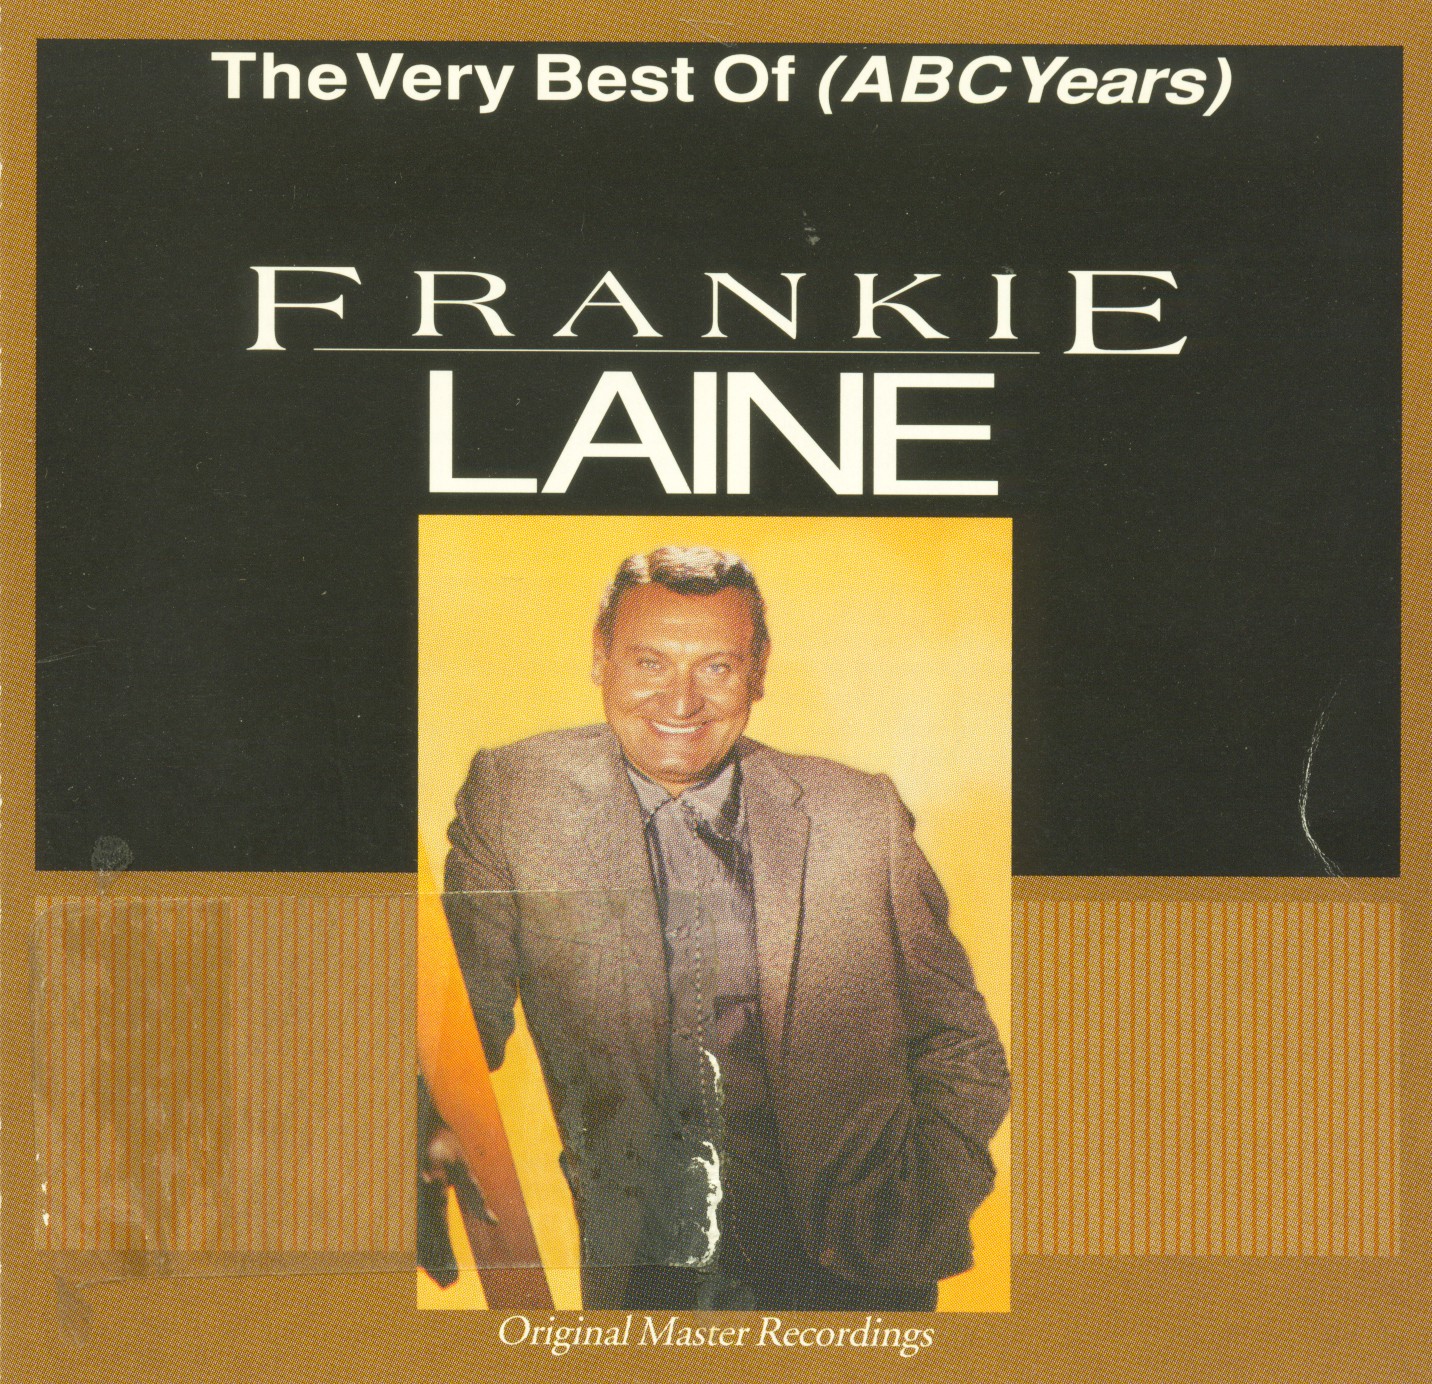 The Very Best Of (ABC Years) Frankie Laine